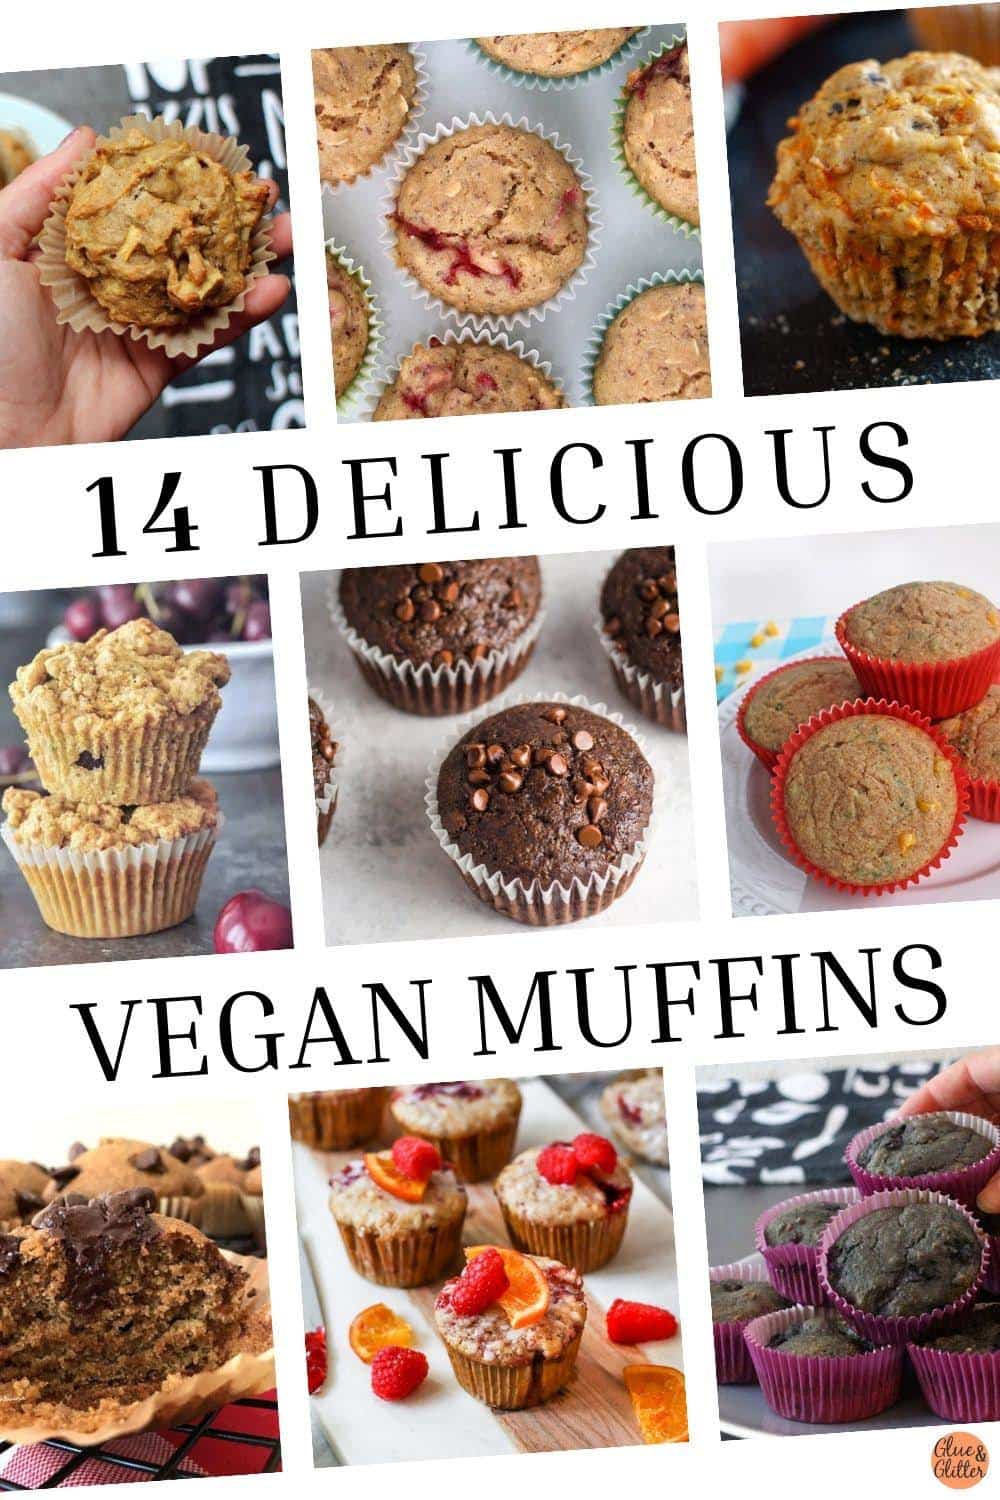 image collage of vegan muffin recipes. Text reads, "14 Delicious Vegan Muffins"